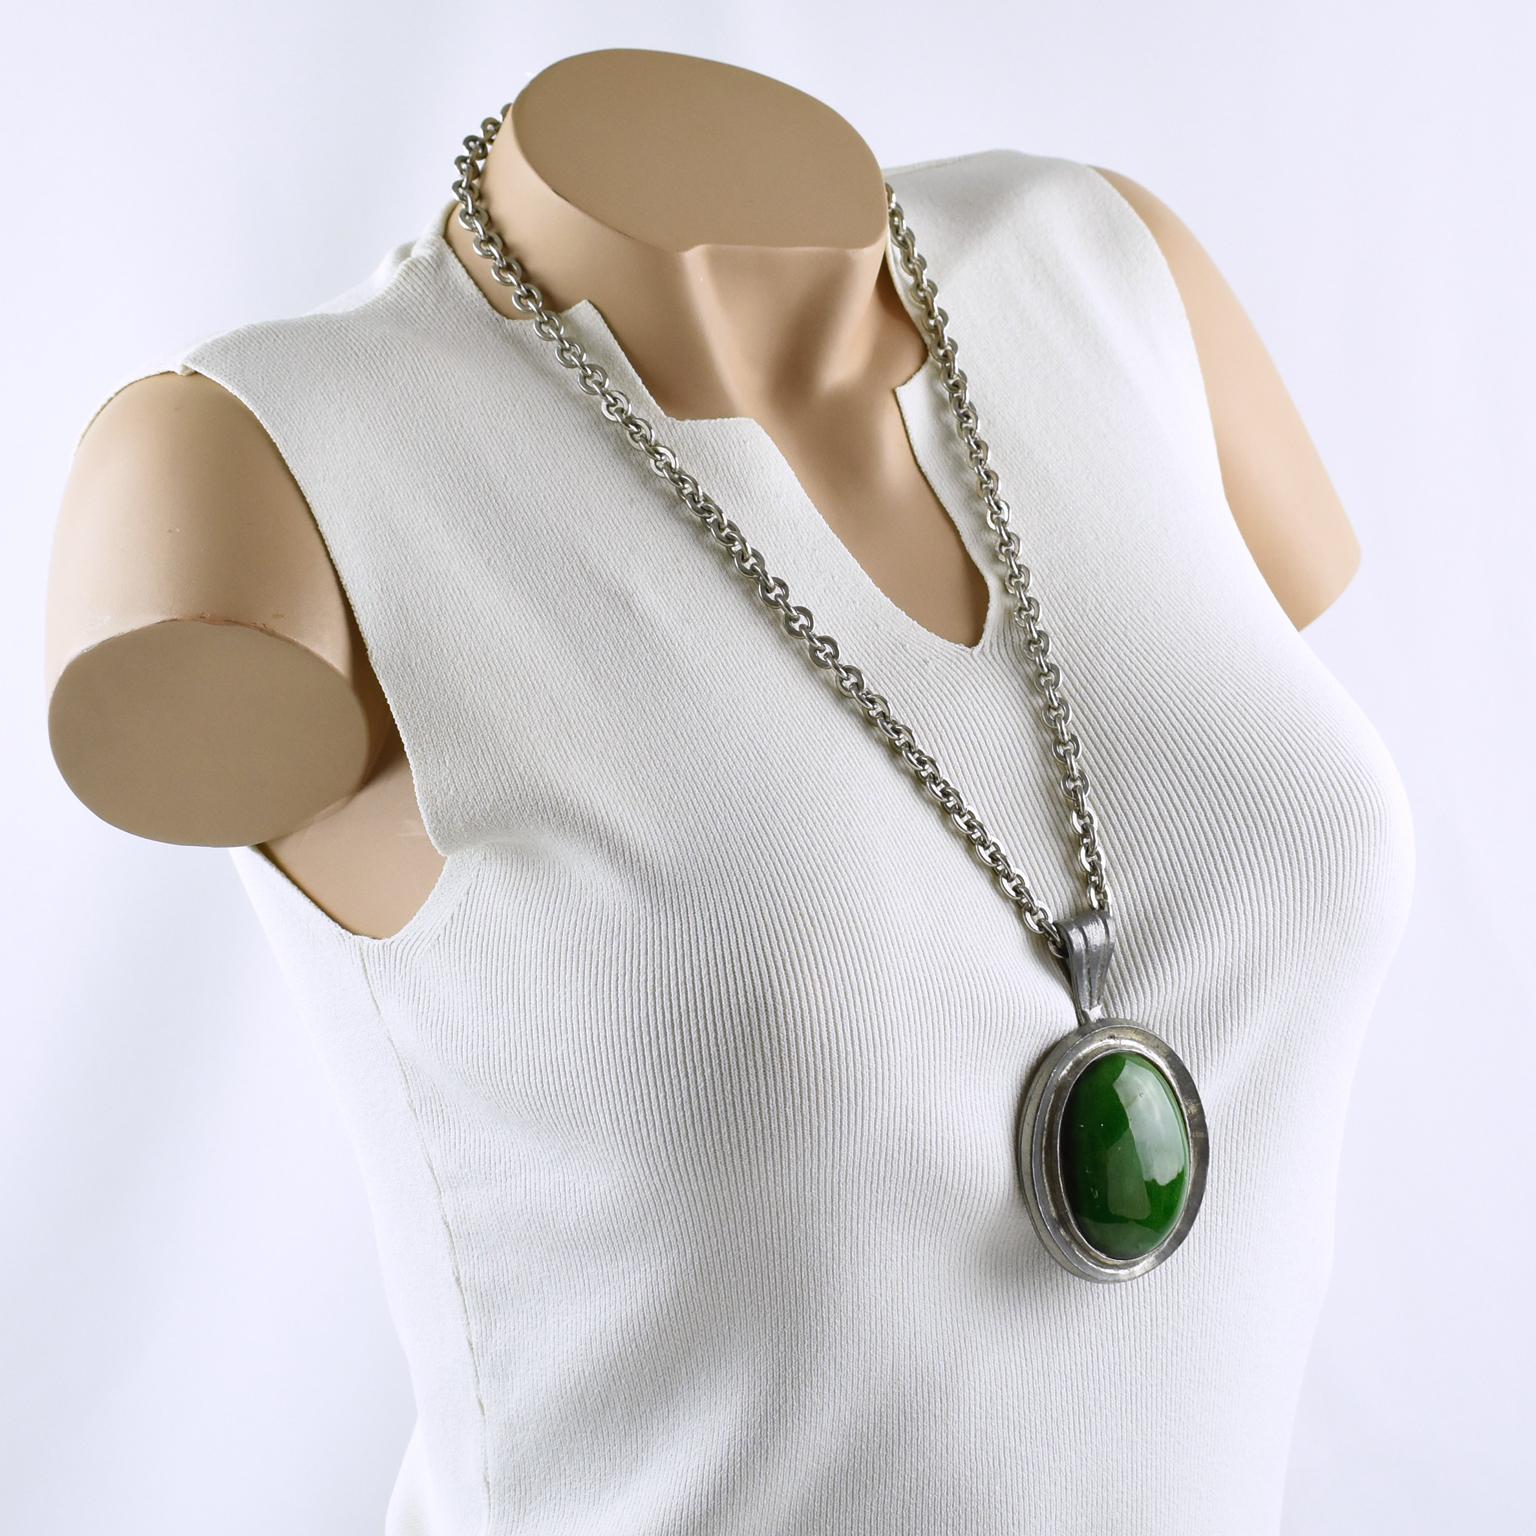 This lovely French Space Age Mid-Century-Modern pendant necklace features a heavy silvered metal extra-long chain complemented by a massive pewter medallion pendant. The pendant is topped with a large ceramic cabochon in a forest green color. There